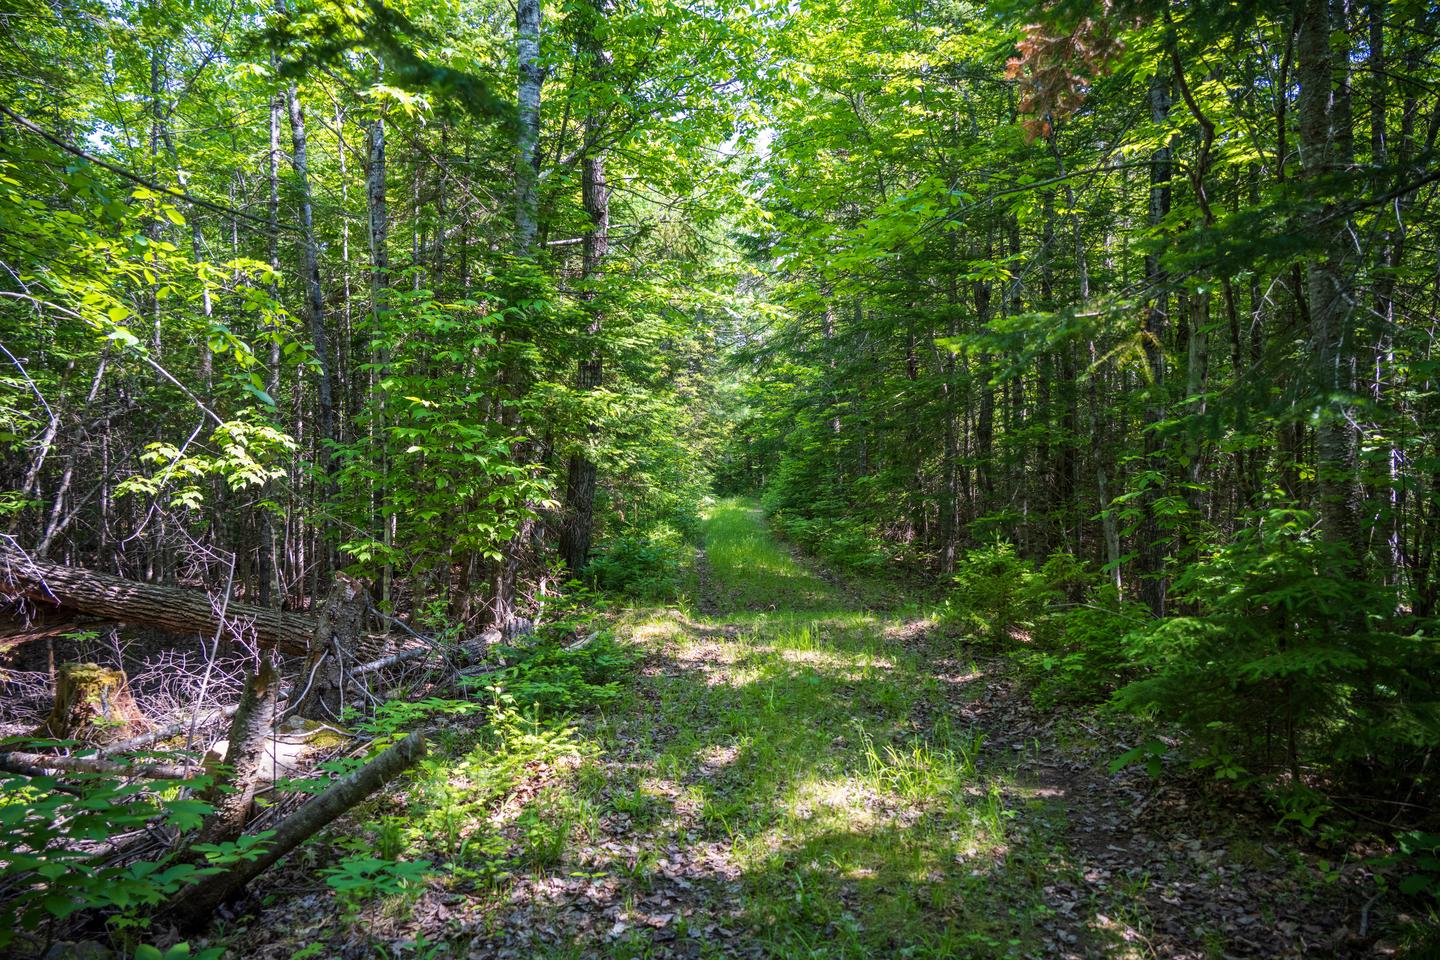 A shaded trail in a dense green forest. The trail surface has tall green grass and is mostly uneven. The trail leads to Stair Falls Campsite from the IAT.Hike into Stair Falls Campsite by starting on the IAT at Haskell Gate Parking.